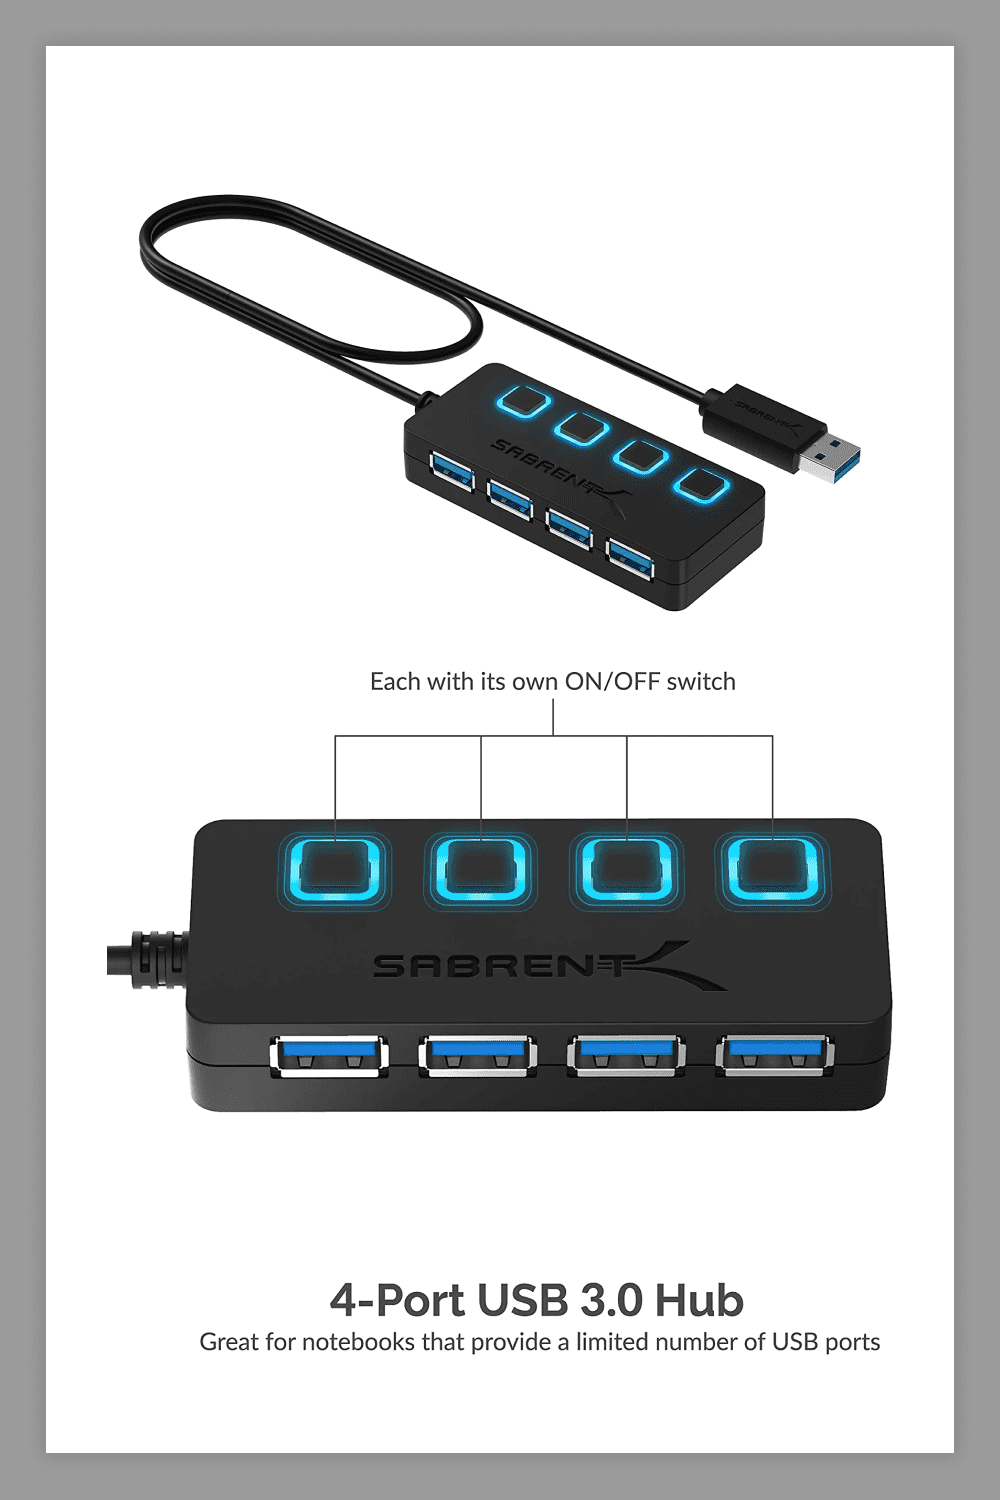 Photo of the Sabrent 4-Port USB Hub with blue leds.